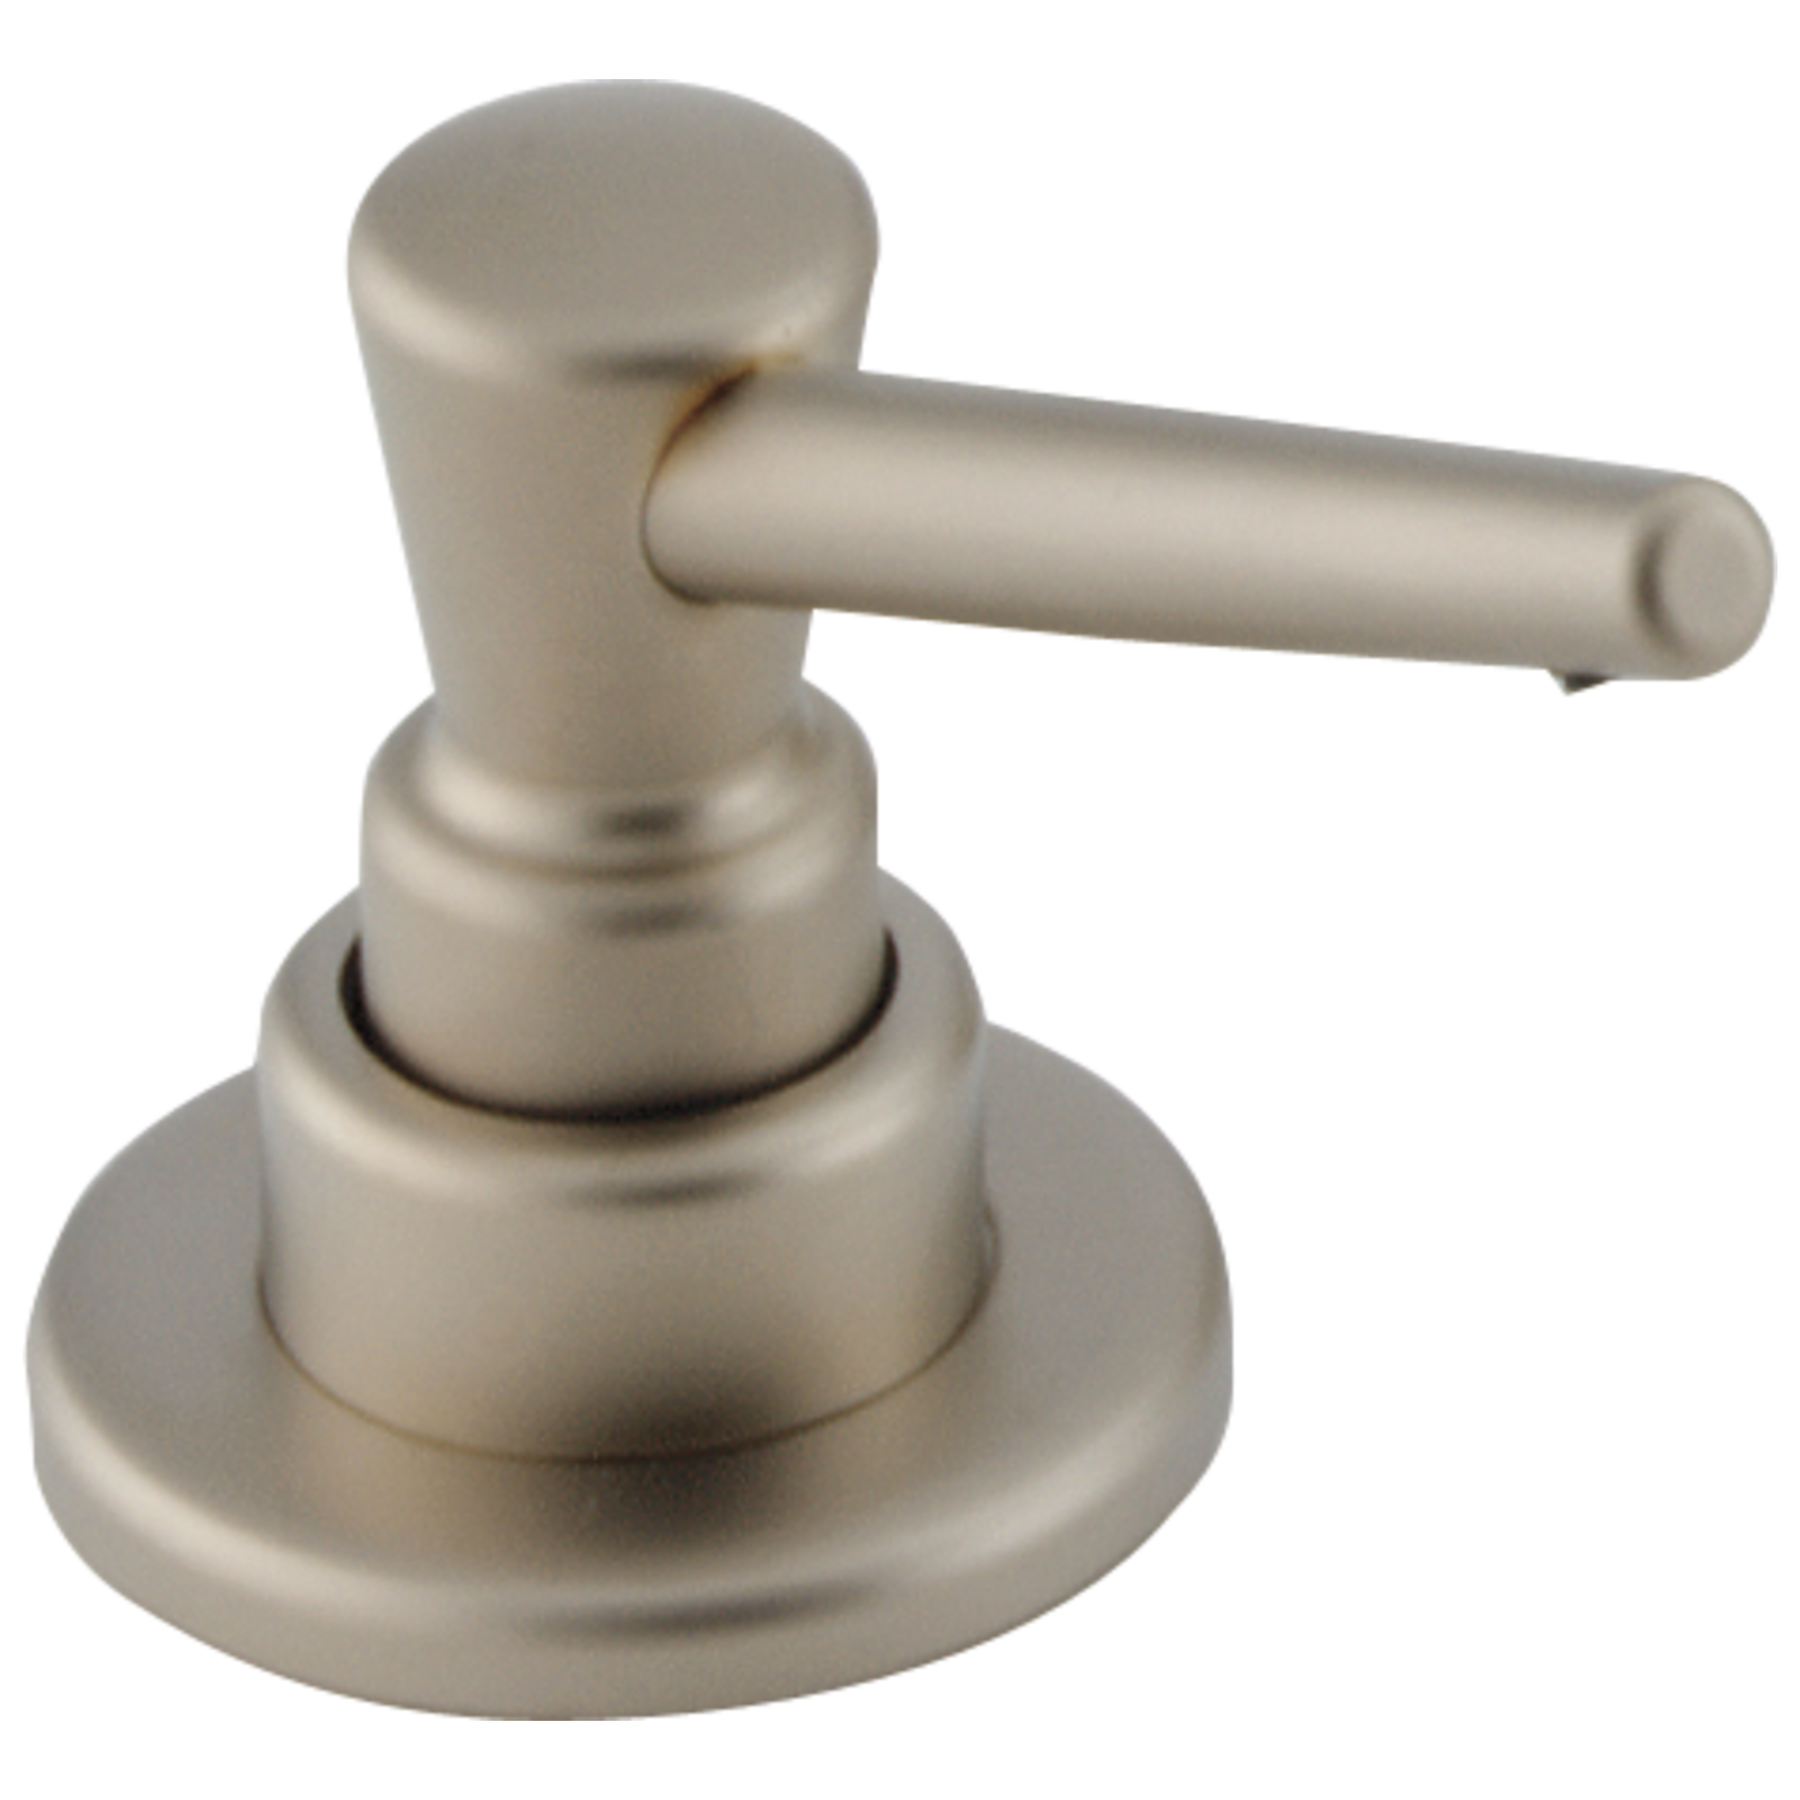 Soap / Lotion Dispenser in Pearl Nickel RP1001NN | Delta Faucet